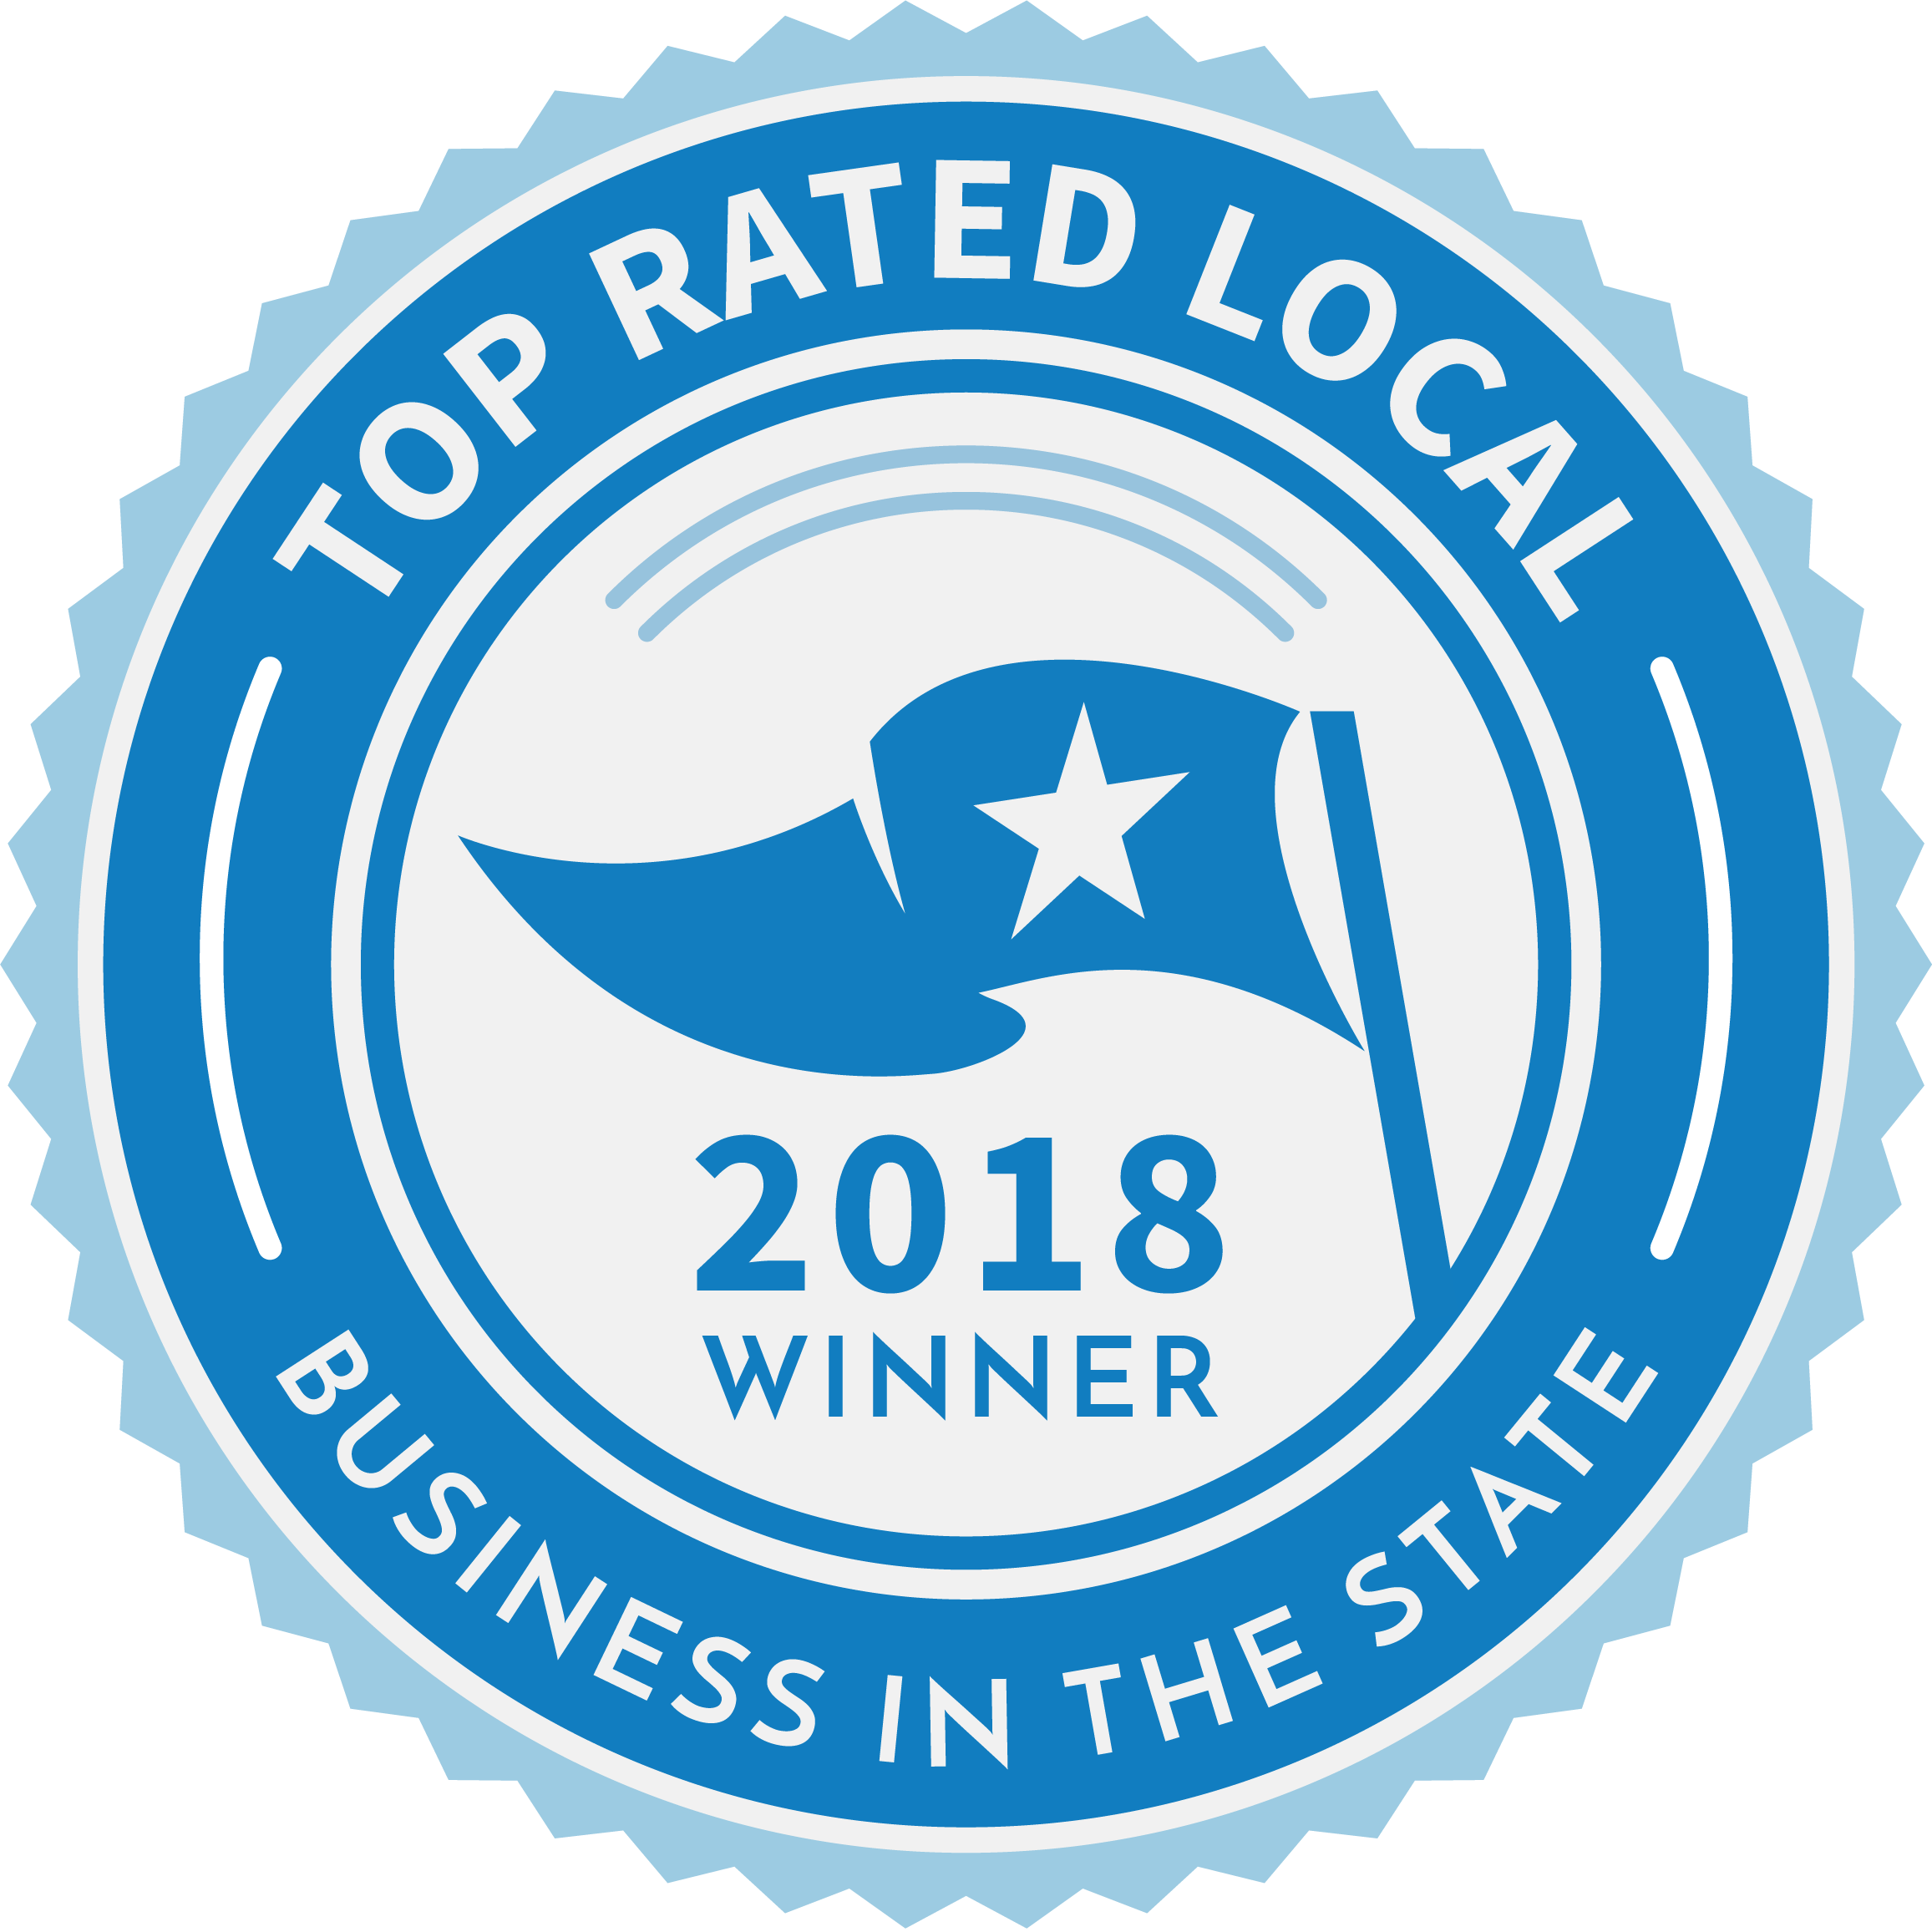 Steven M. Sweat, Personal Injury Lawyers, APC Named Top Rated Local Law Firm